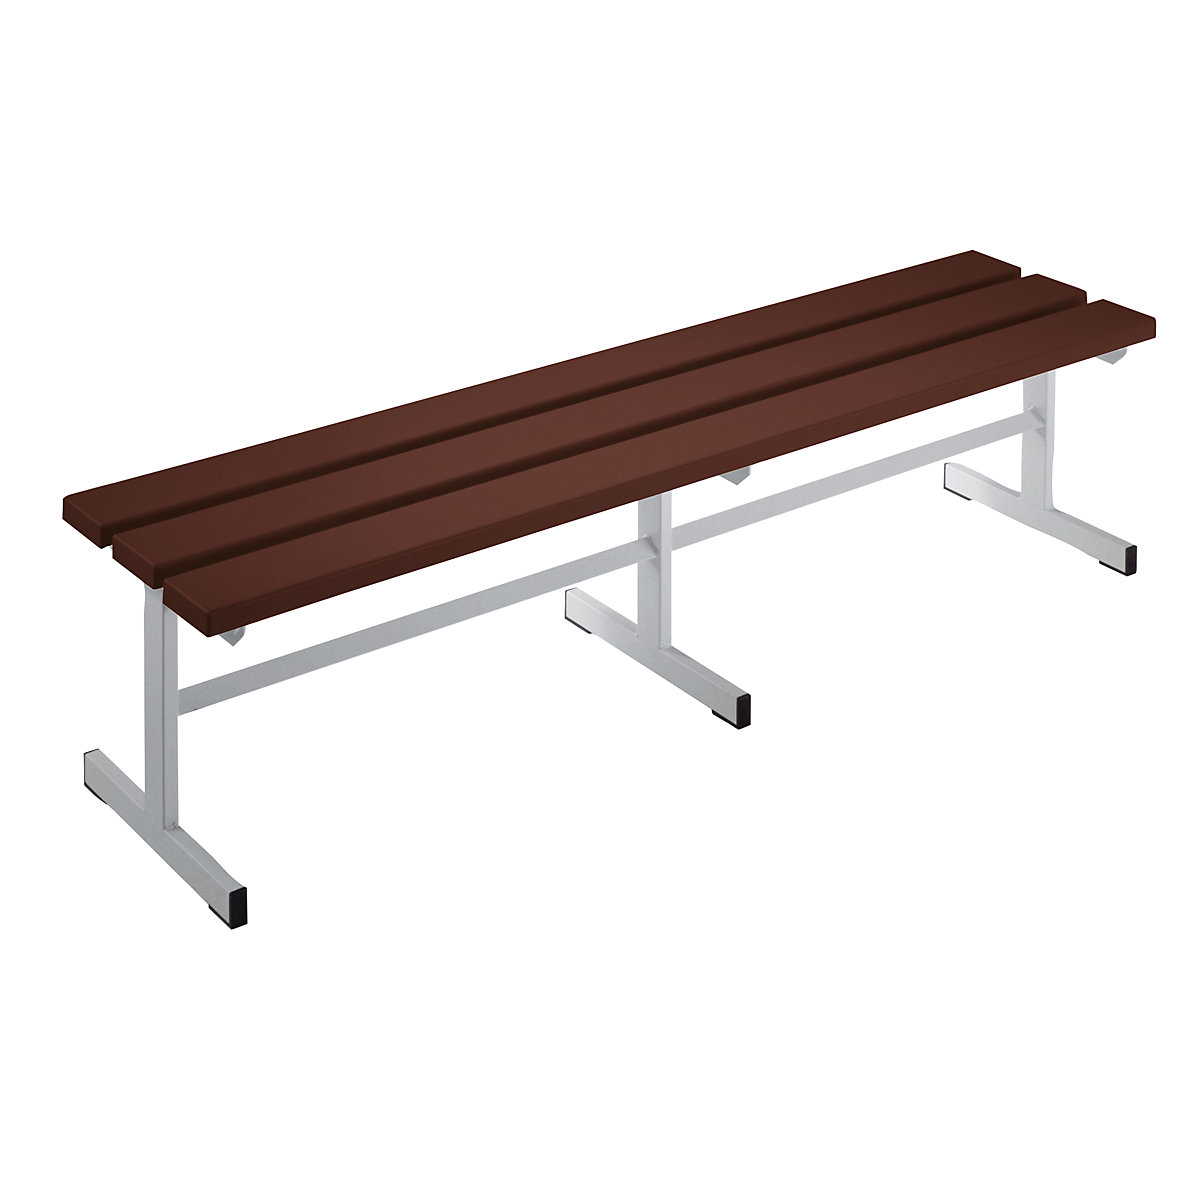 Wolf – Cloakroom bench, single sided seat, brown, 1500 mm length